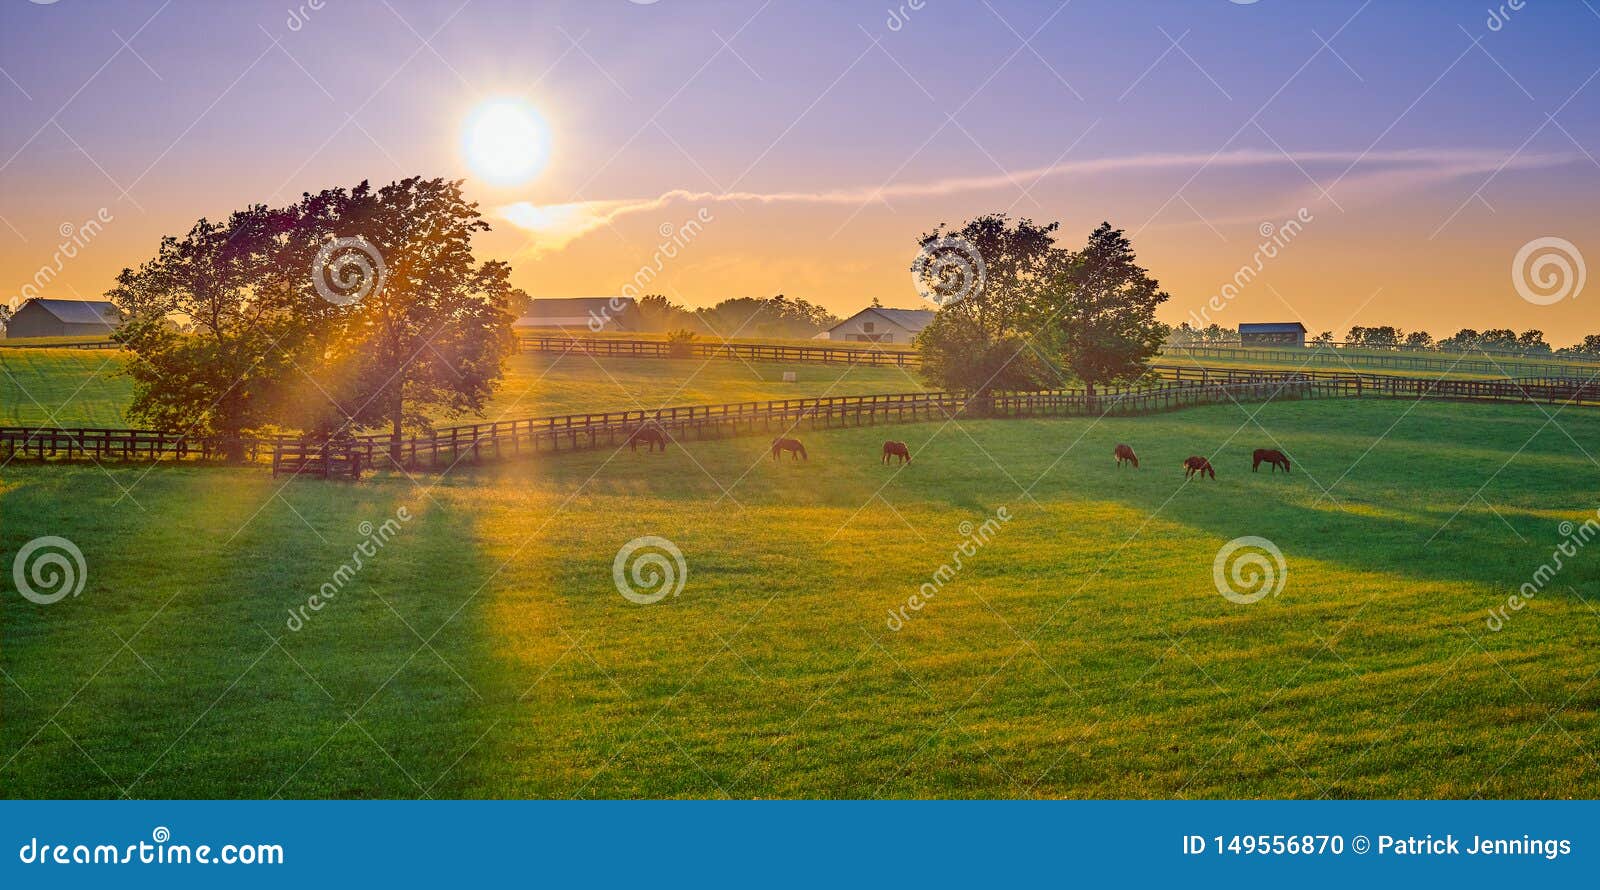 thoroughbred horses grazing at sunset